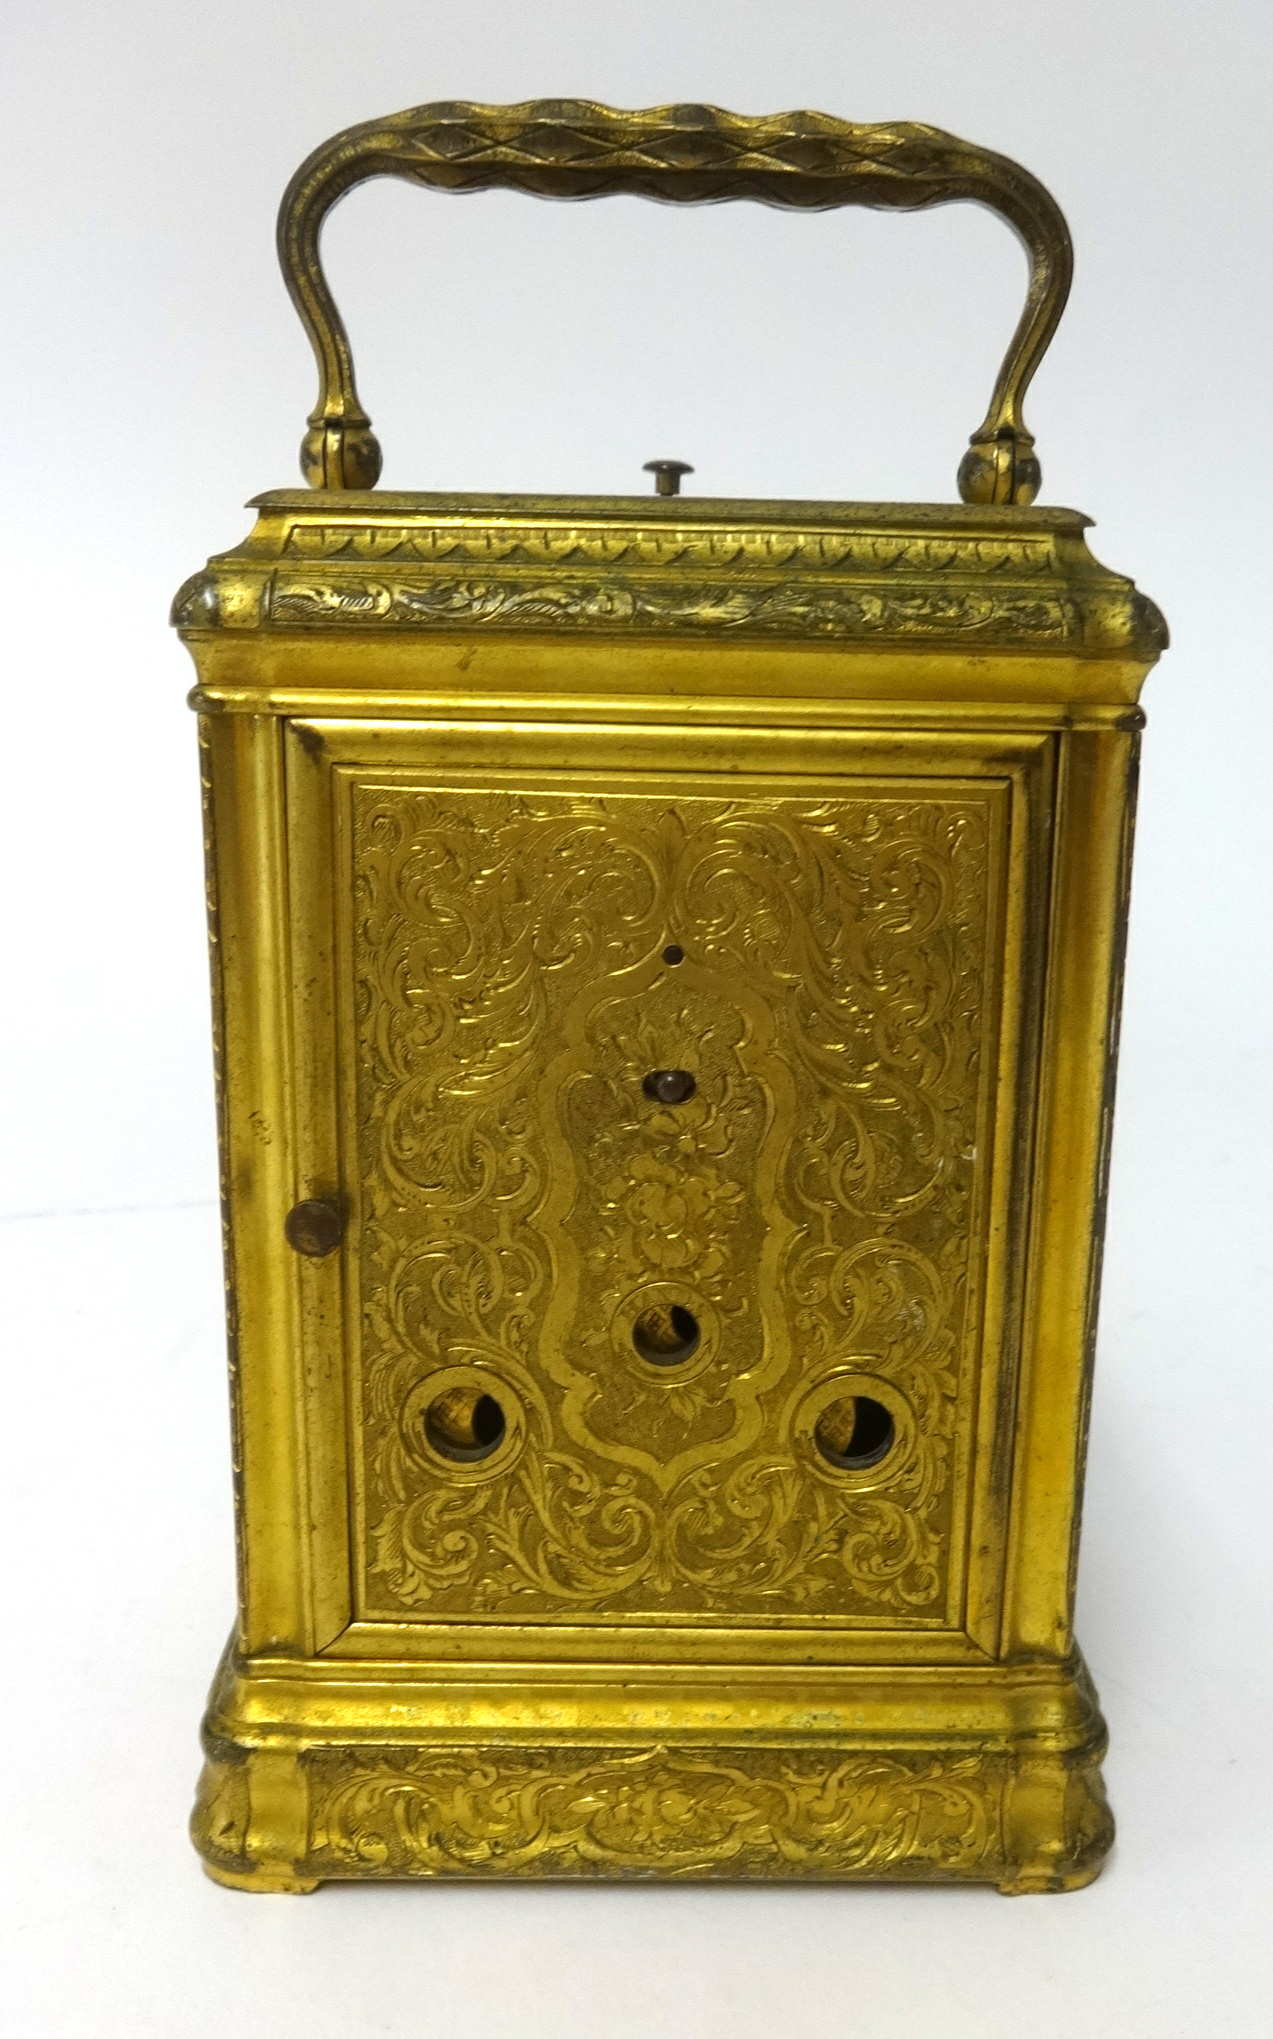 A 19th century gilt brass cased repeater carriage clock, key wind from back with platform - Image 4 of 4